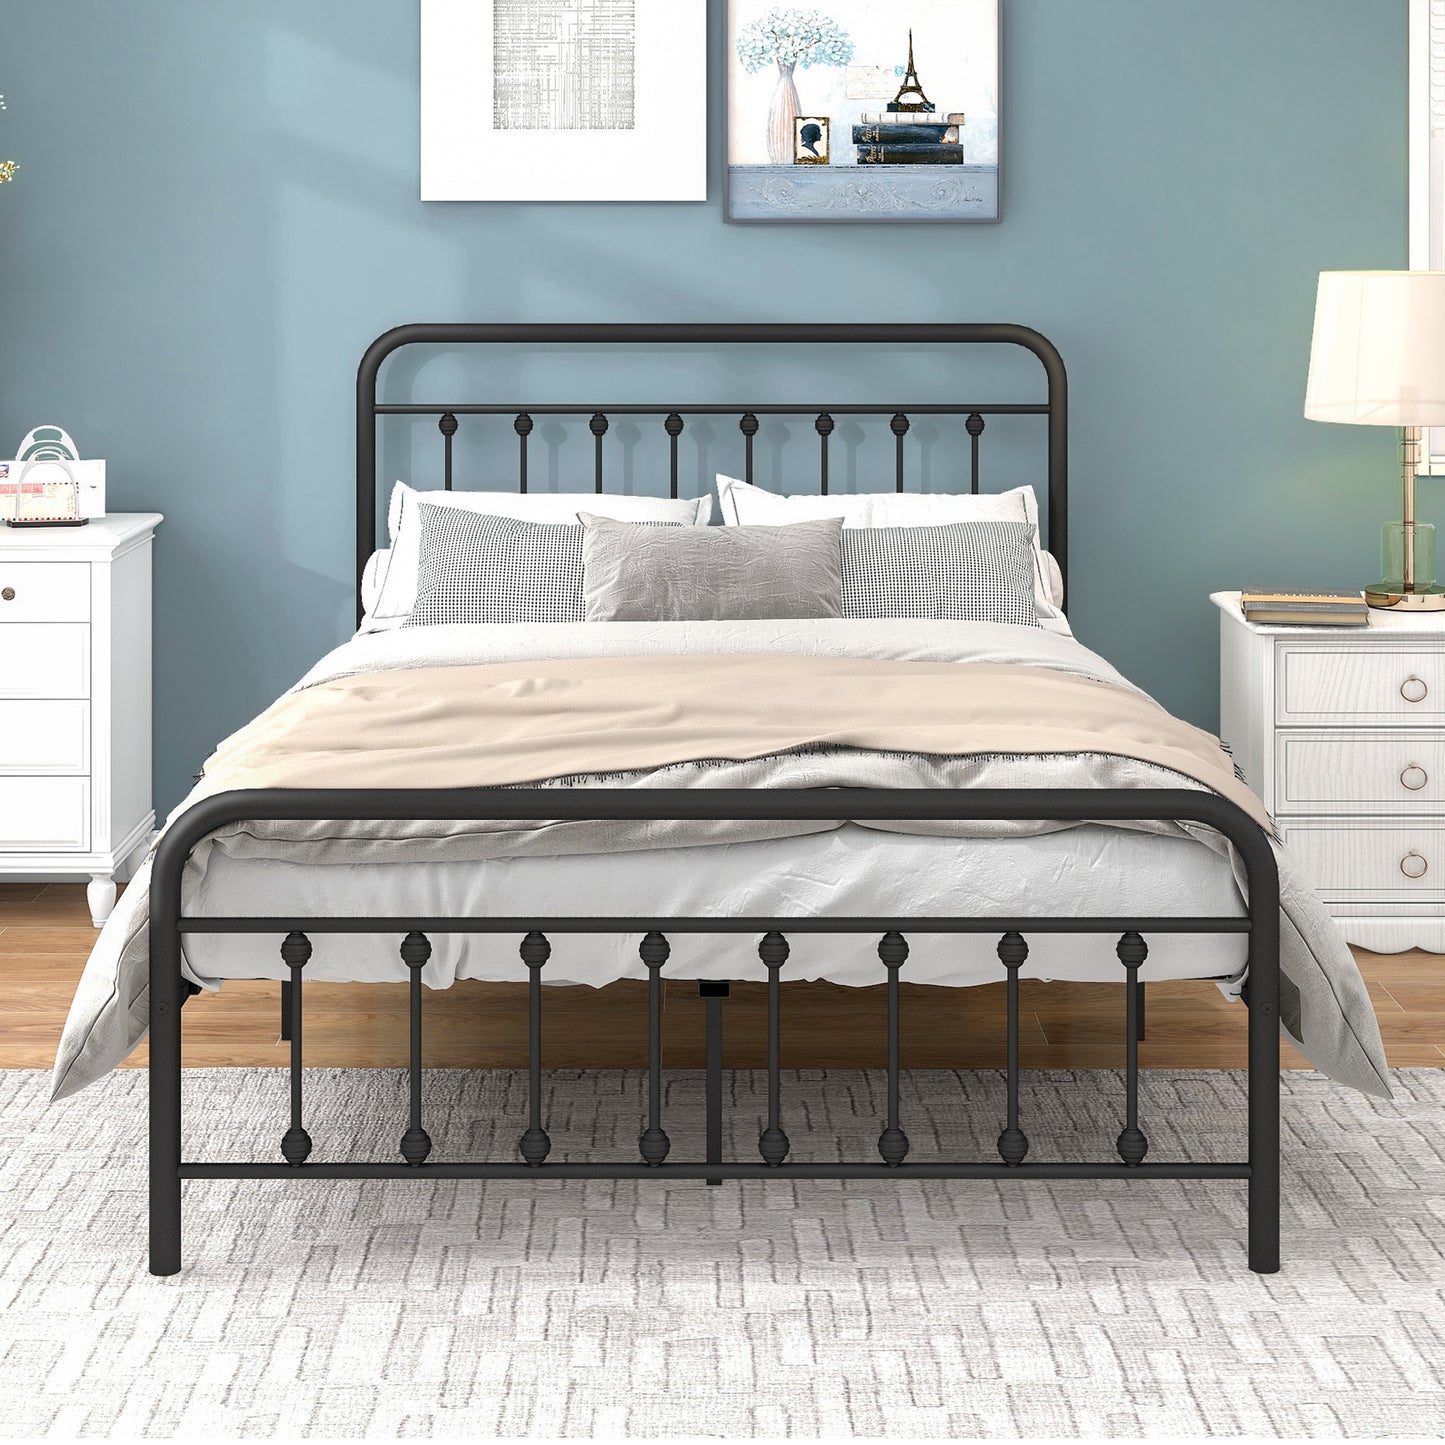 SYNGAR Iron Platform Bed Frame Queen Size with Vintage Headboard and Footboard, Metal Queen Bed Frame Mattress Foundation with Strong Steel Slat Support, Black